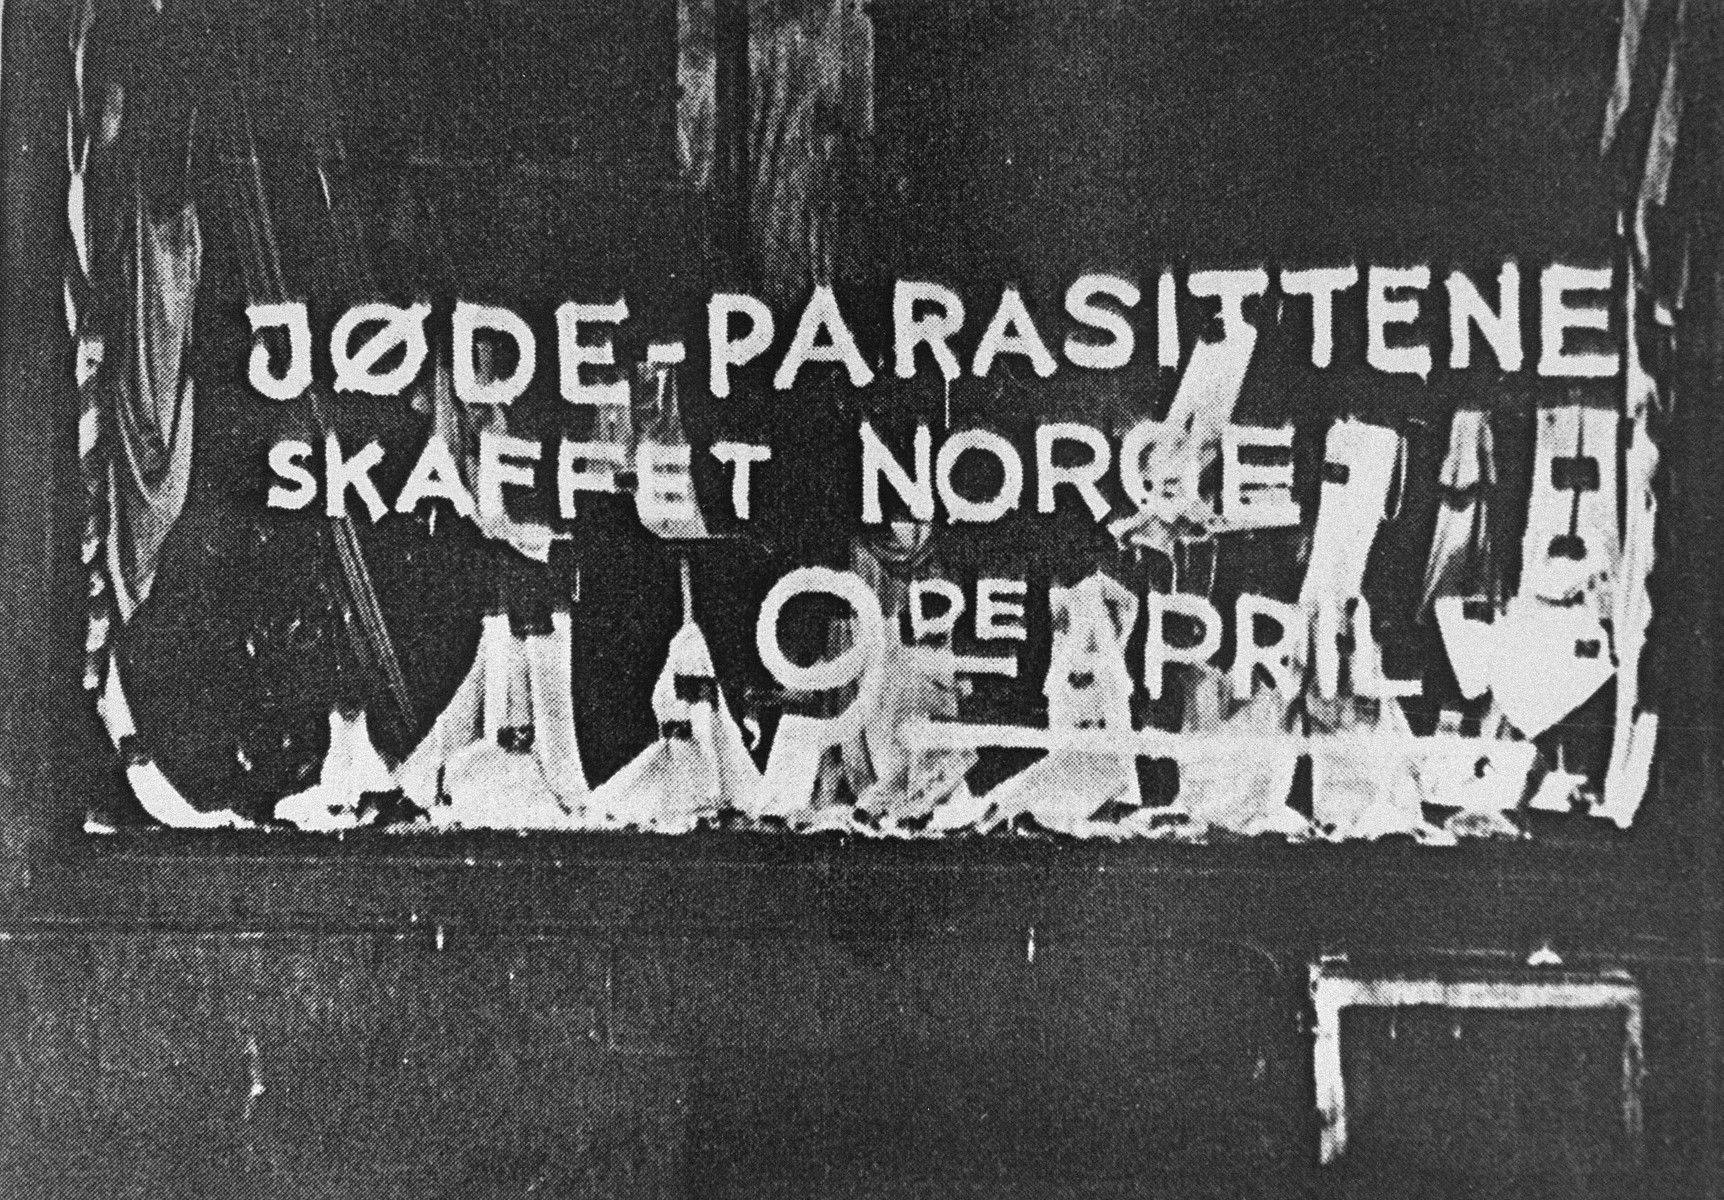 Anti-semitic graffiti painted on the window of a Jewish business reads: "The Jewish parasite sold Norway on the 9th of April [the date of the German invasion in 1940]."